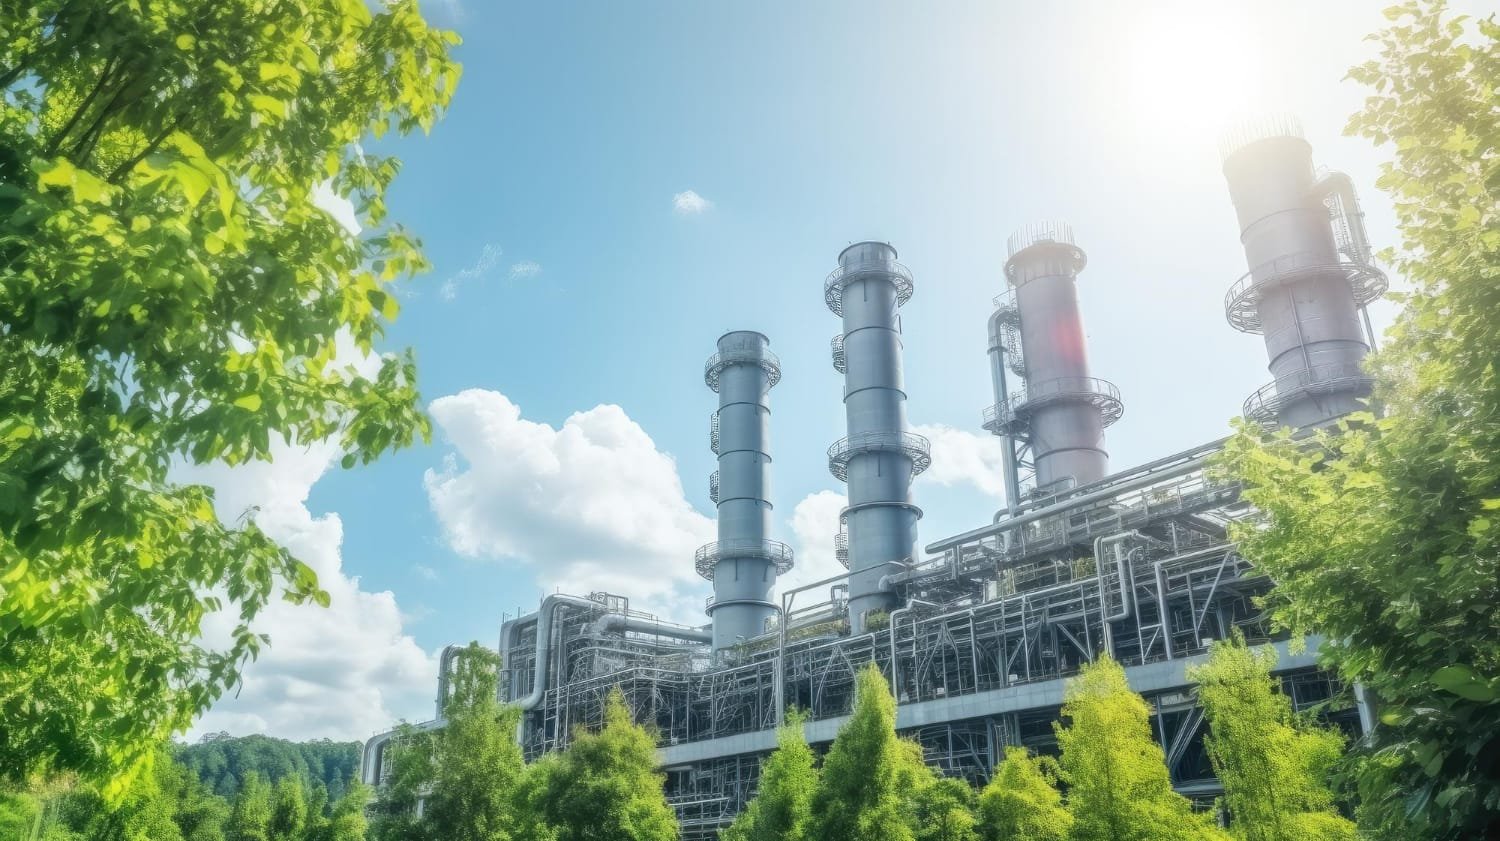 Environmental Benefits of Regular Plant Maintenance and Scheduled Downtime